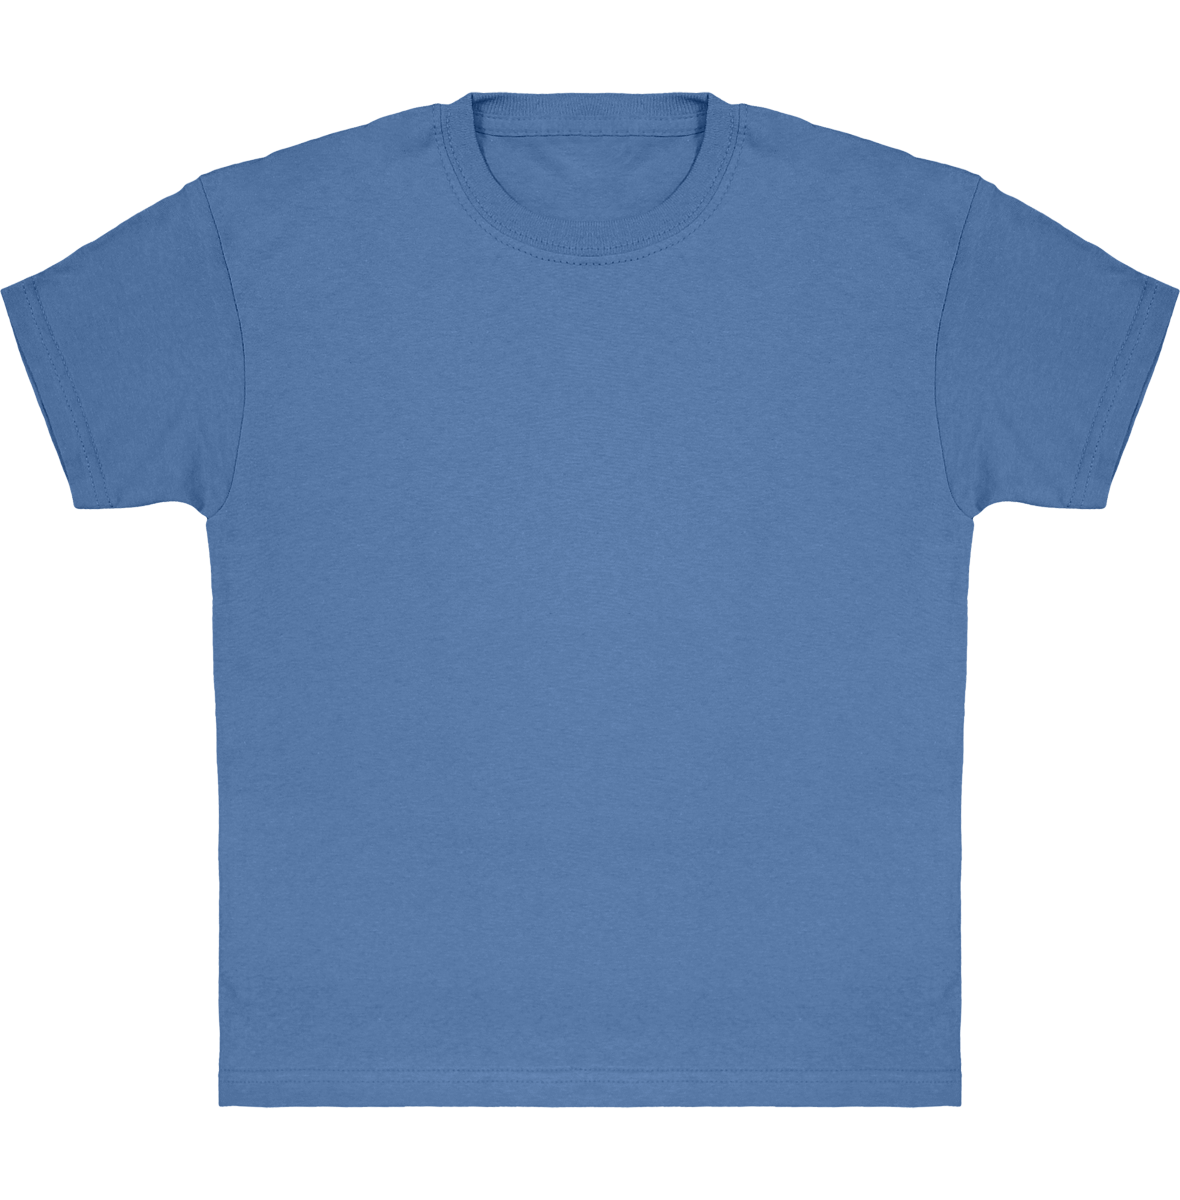 Classic Cotton T-Shirt For Children To Customize Azure Blue